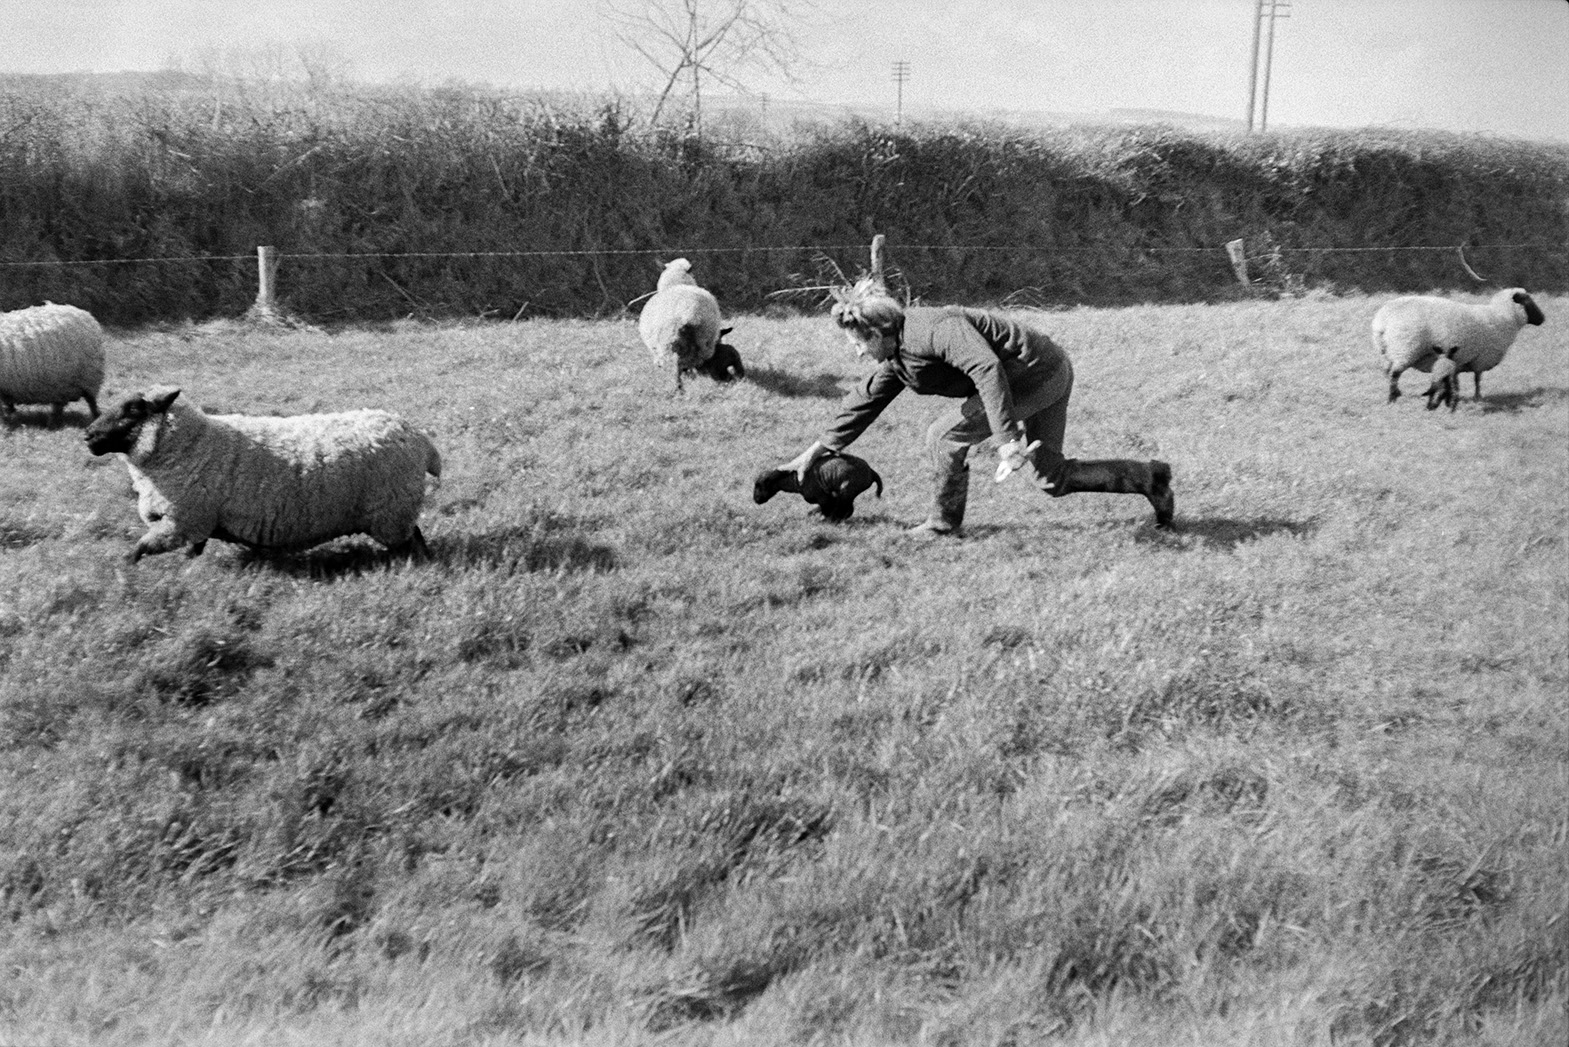 Ivor Bourne catching a lamb in a field at Mill Road Farm, Beaford to tag it. Other ewes and lambs can be seen in the field. The farm was also known as Jeffrys.